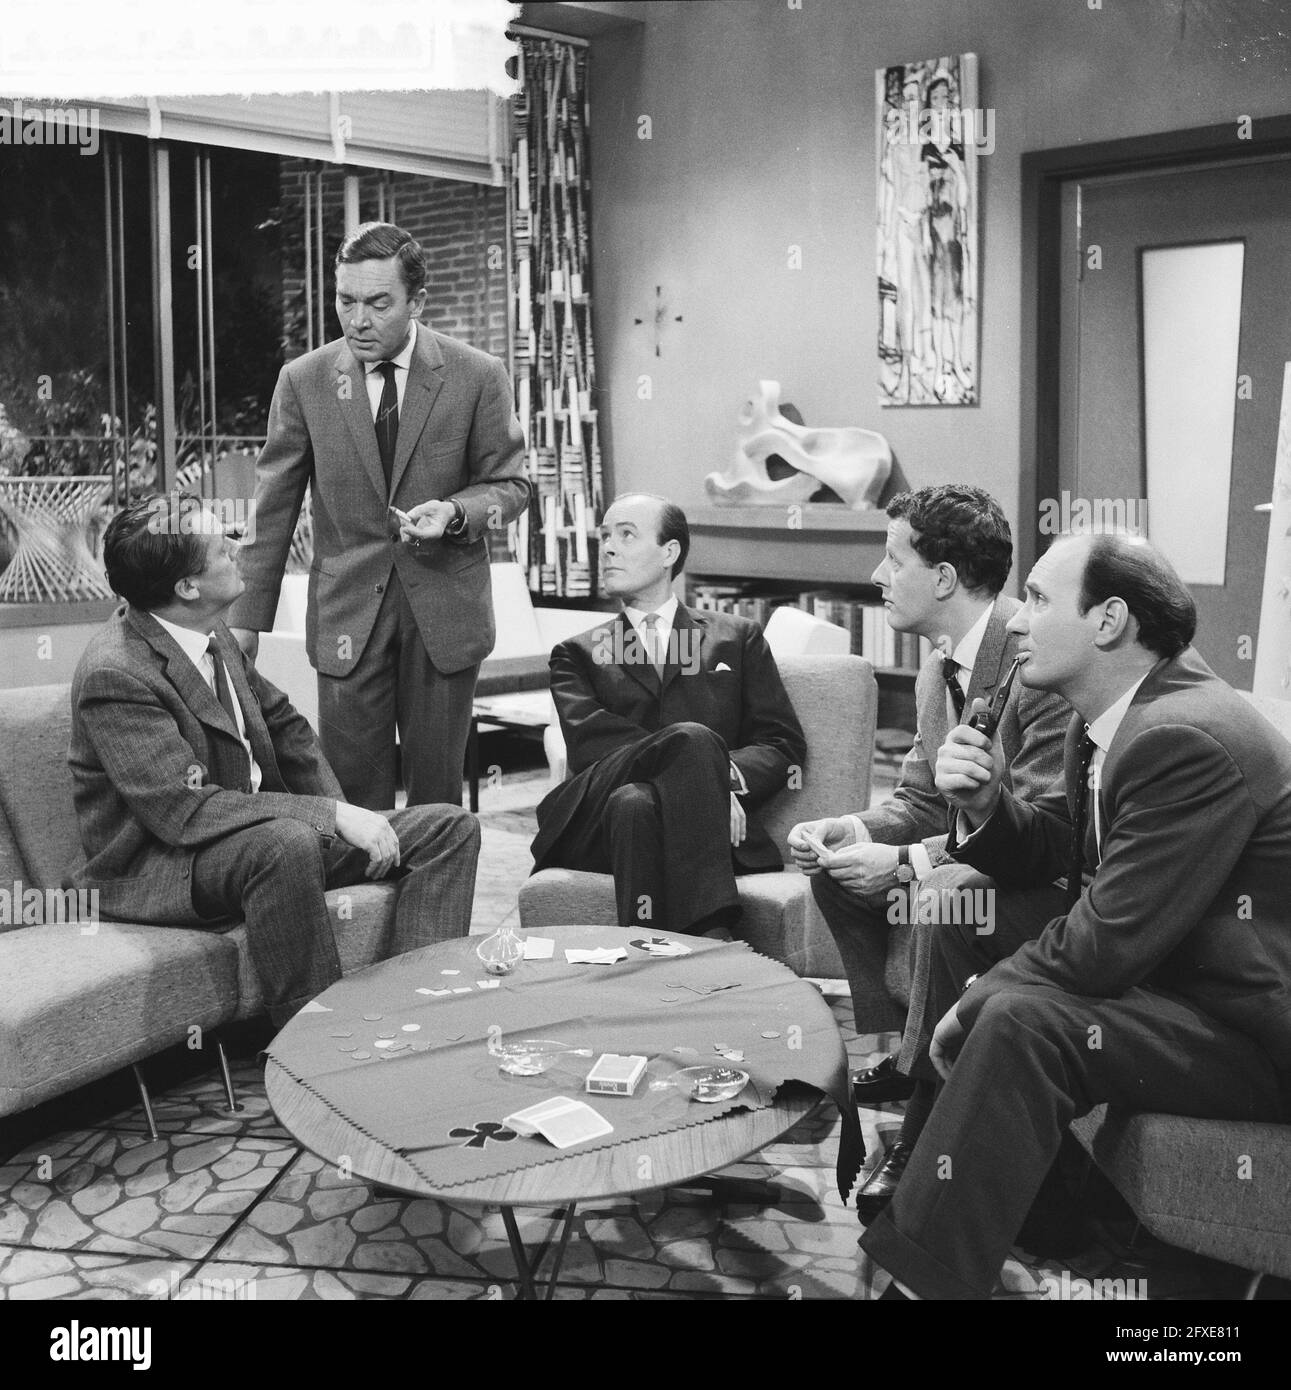 Television rehearsal Poker. Andre van den Heuvel, Peter Aryans, Pim Dikkers, Luc Lutz, June 8, 1961, Television rehearsals, The Netherlands, 20th century press agency photo, news to remember, documentary, historic photography 1945-1990, visual stories, human history of the Twentieth Century, capturing moments in time Stock Photo